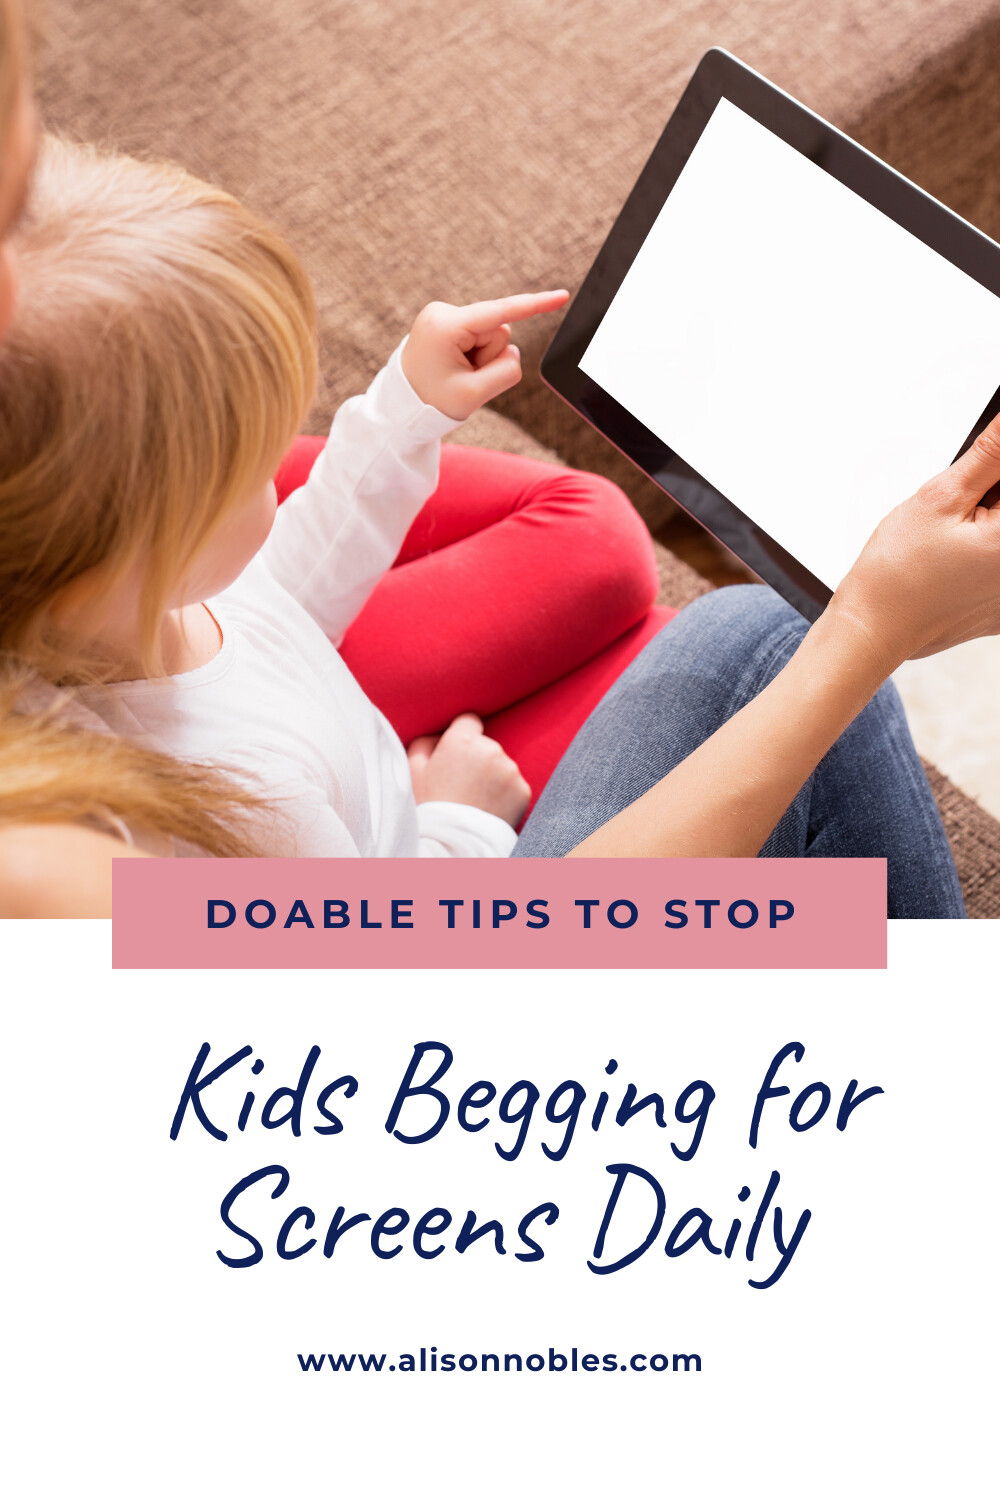 How to Get Kids to Stop Begging for Screens Daily!